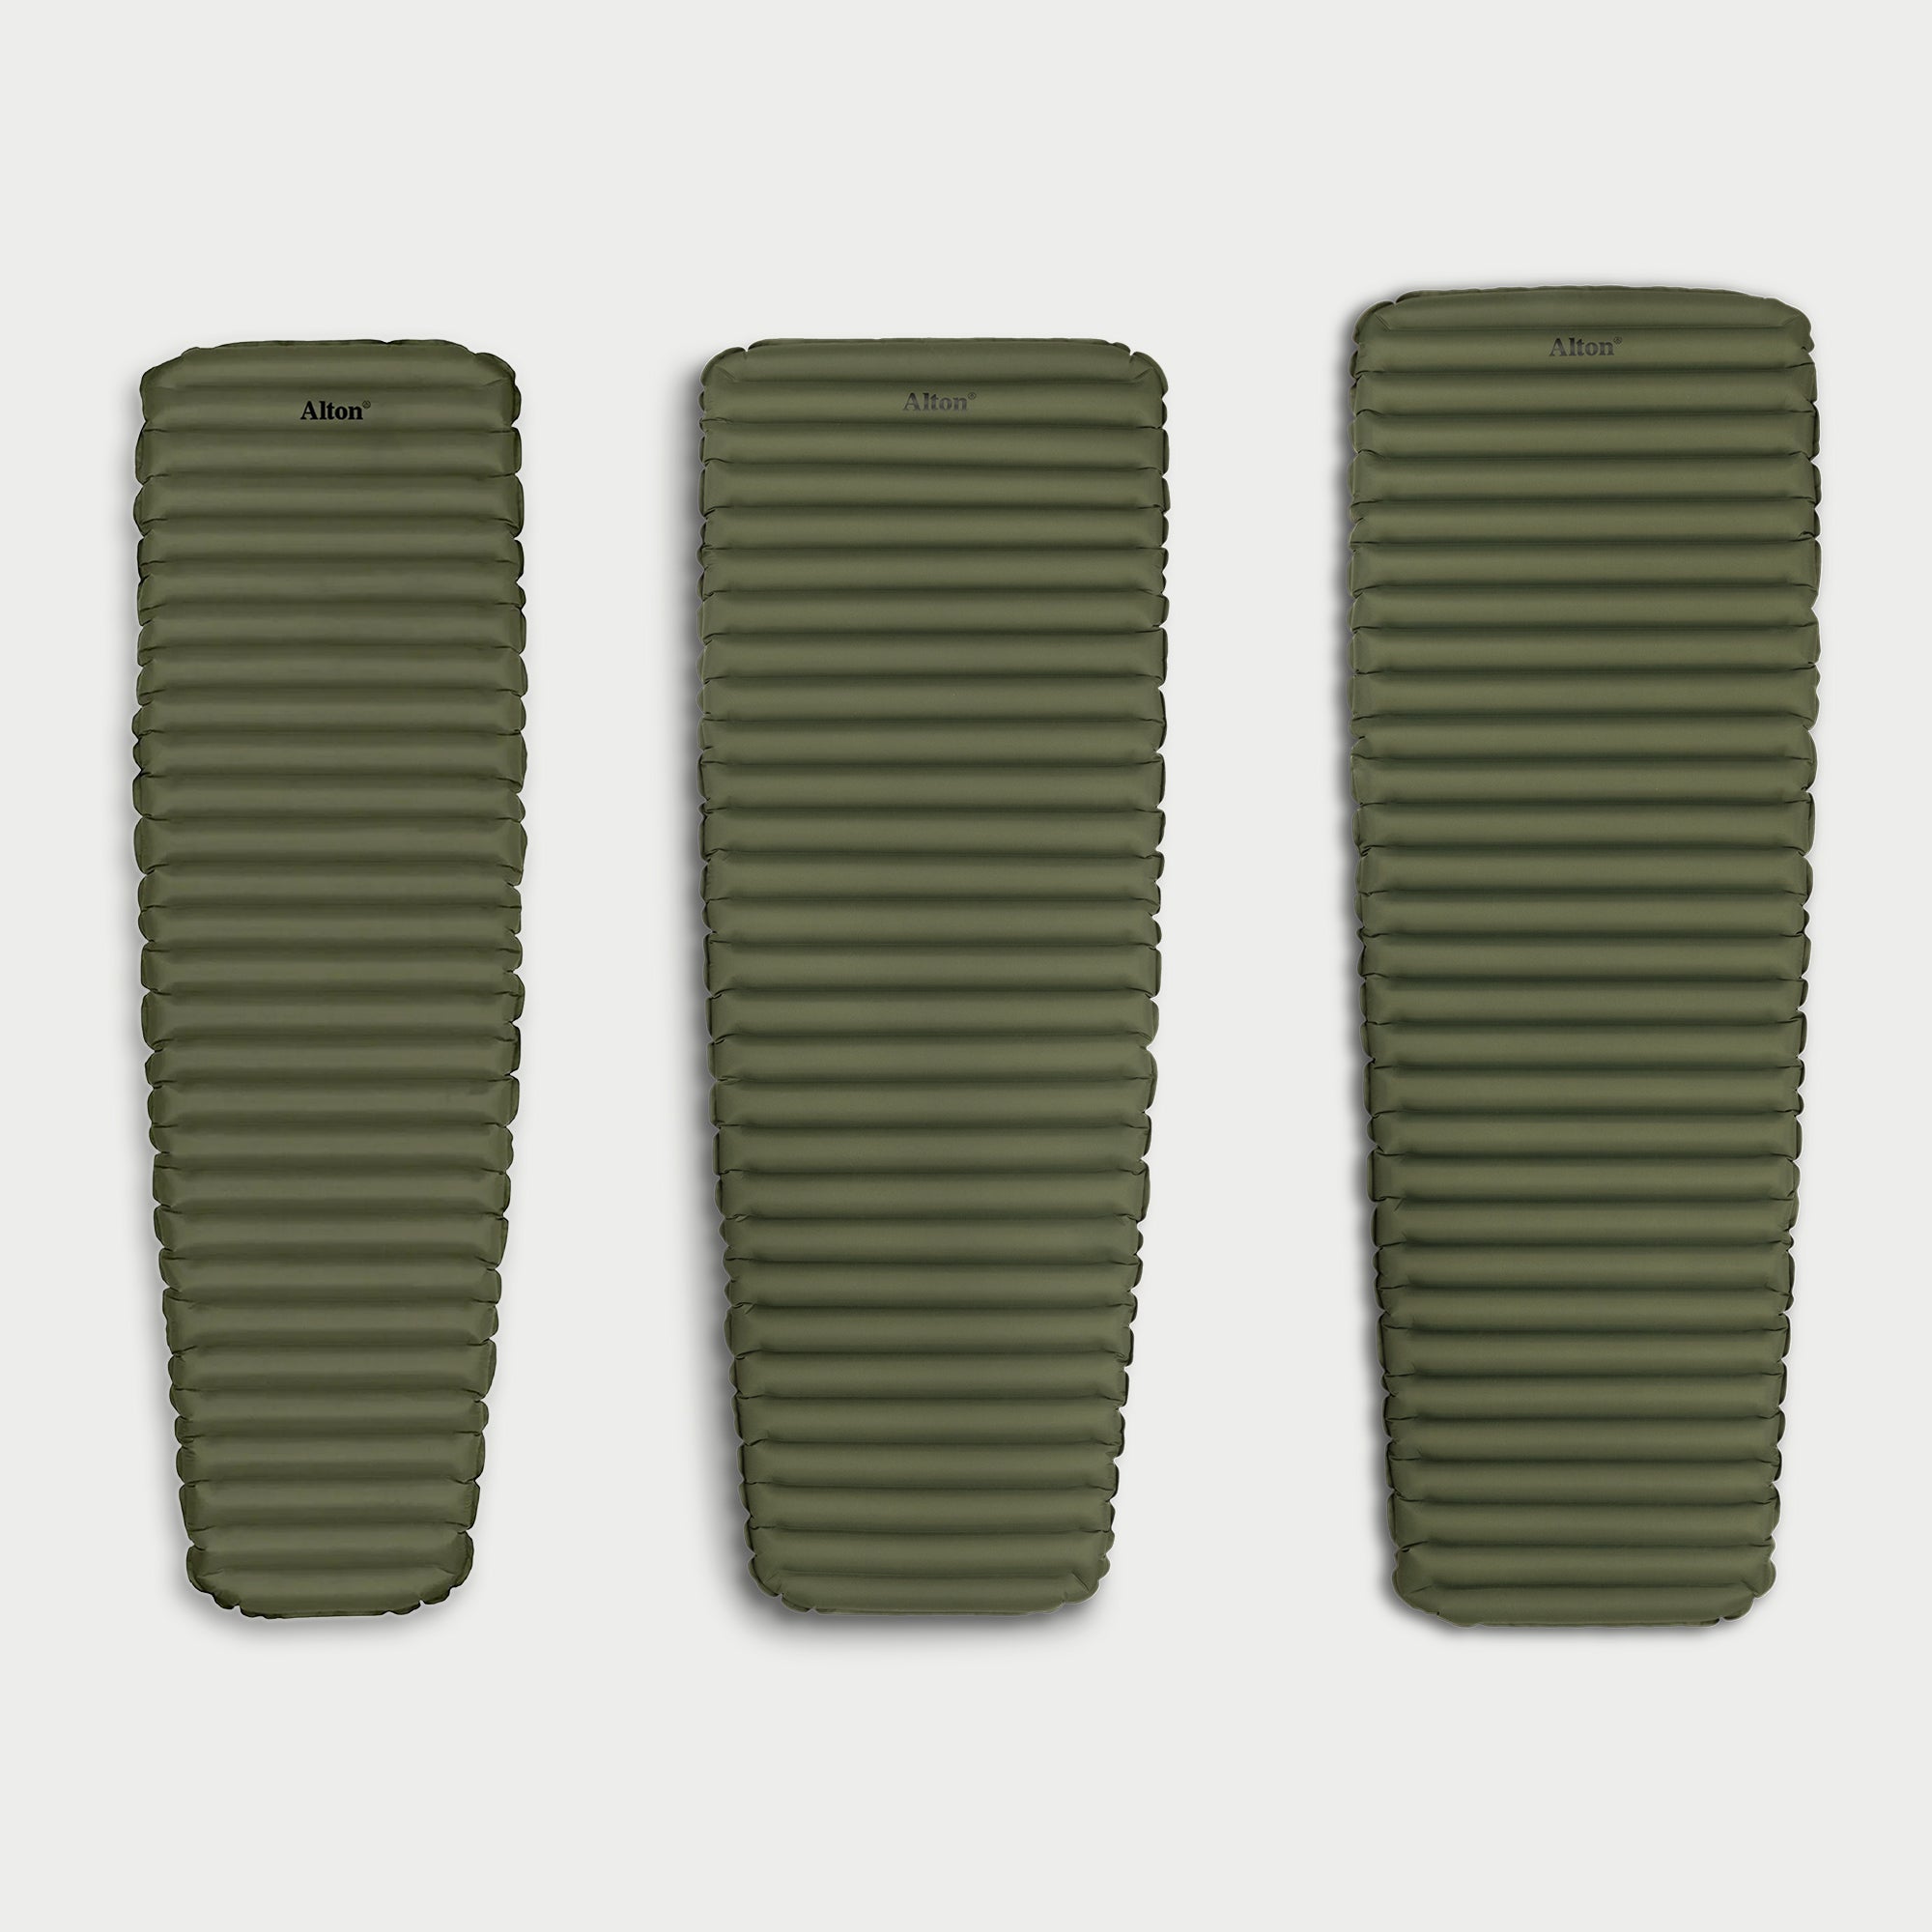 Image of Insulated Sleeping Mat (R4)